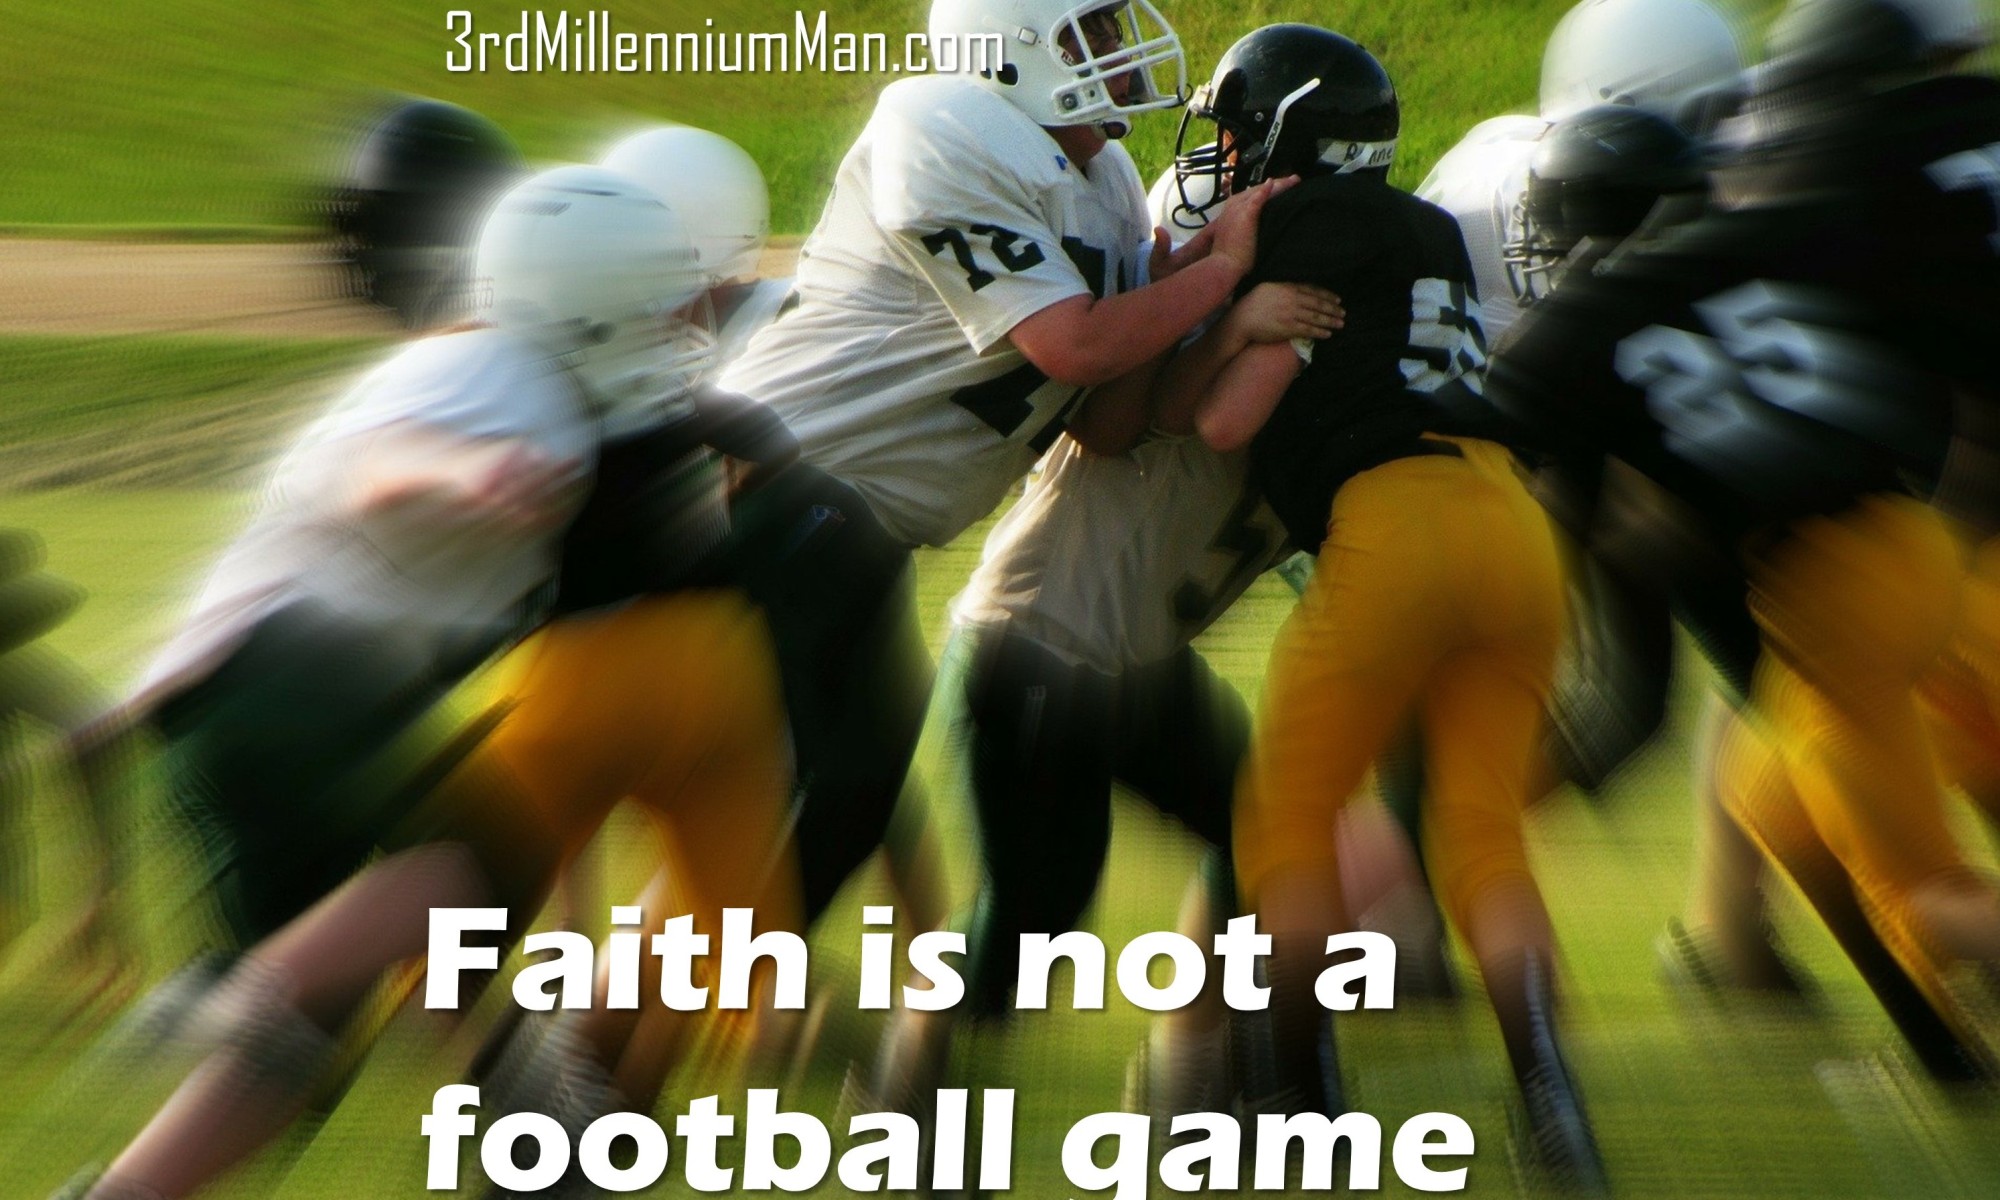 title text with image of football players